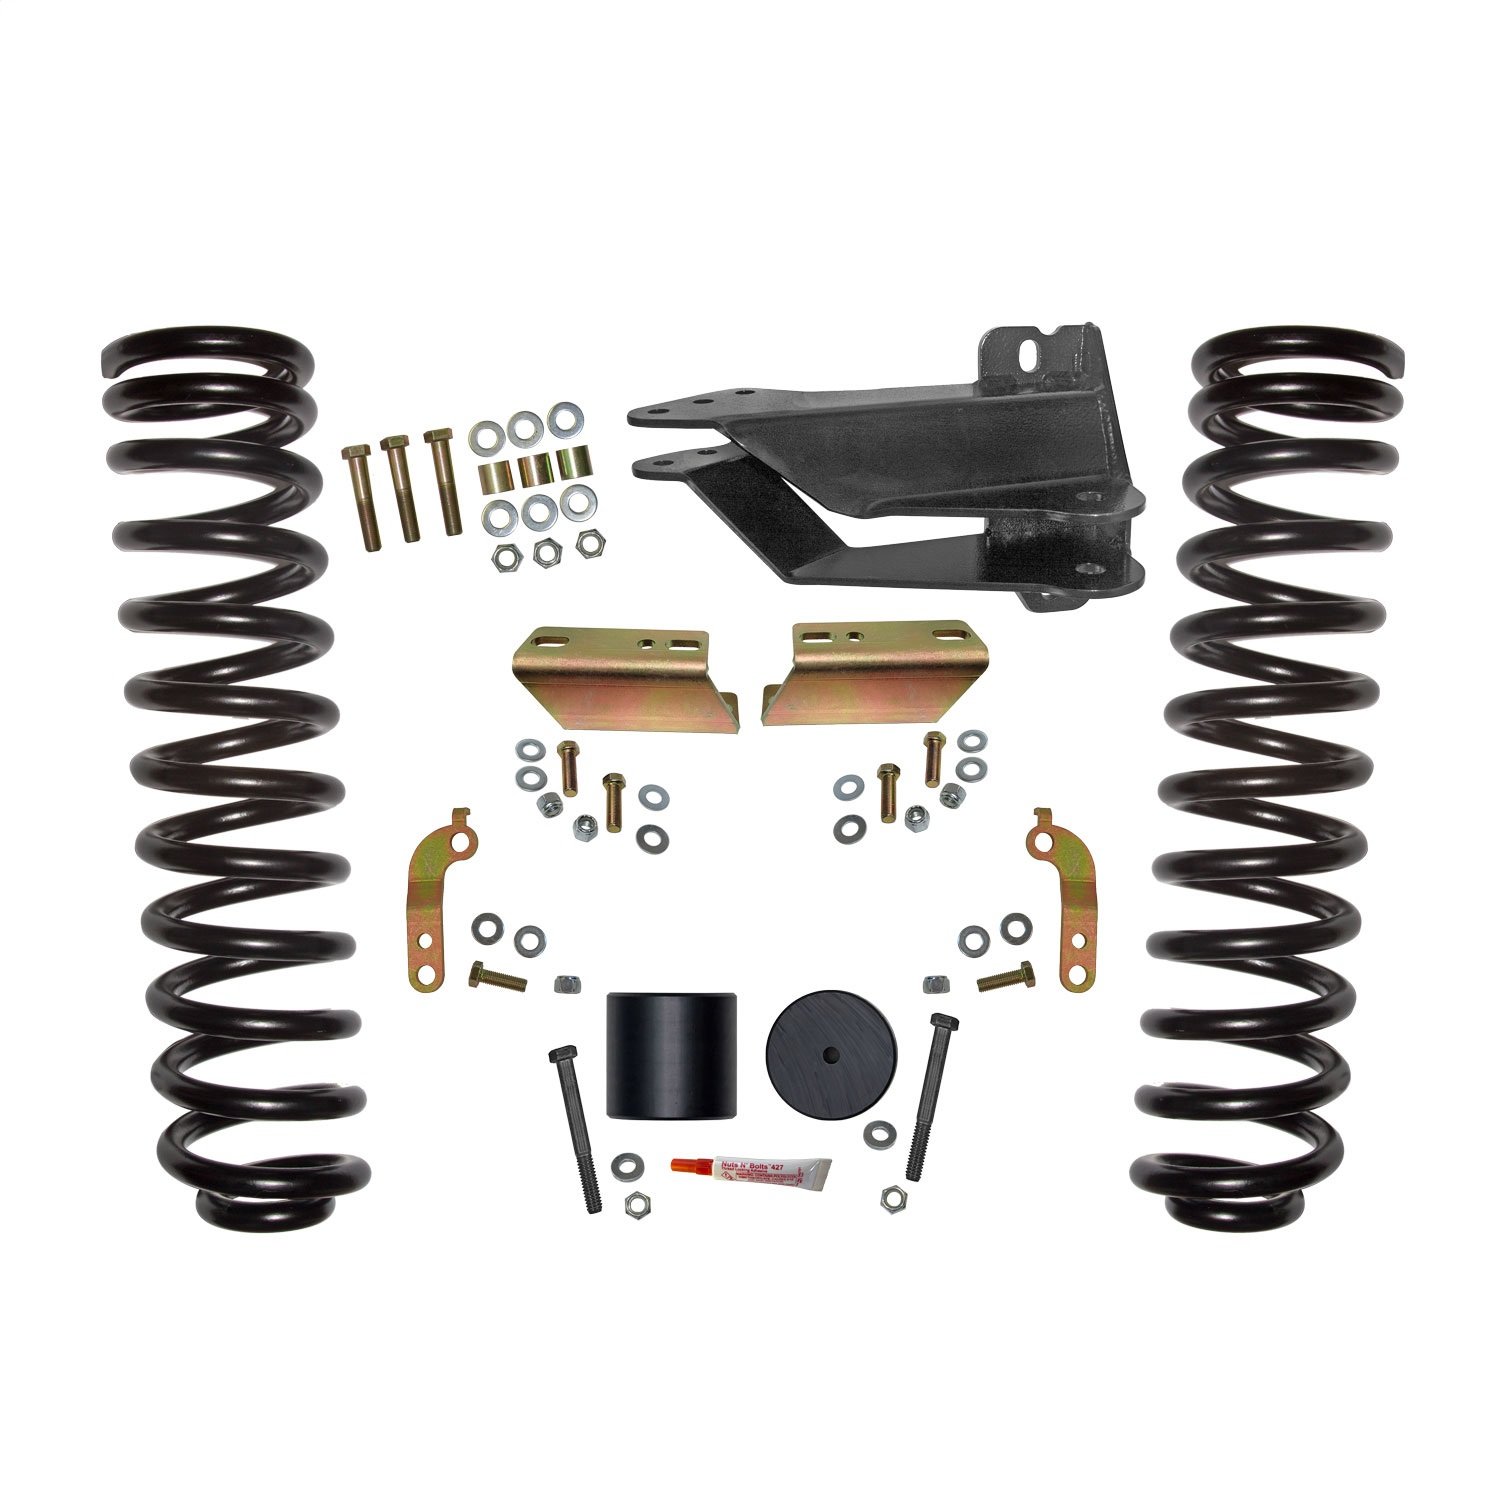 F1725VB 2.5 in. Front Leveling Kit Fits Select Ford F-250, F-350 Super Duty Diesel Trucks [No Shocks/Extensions]